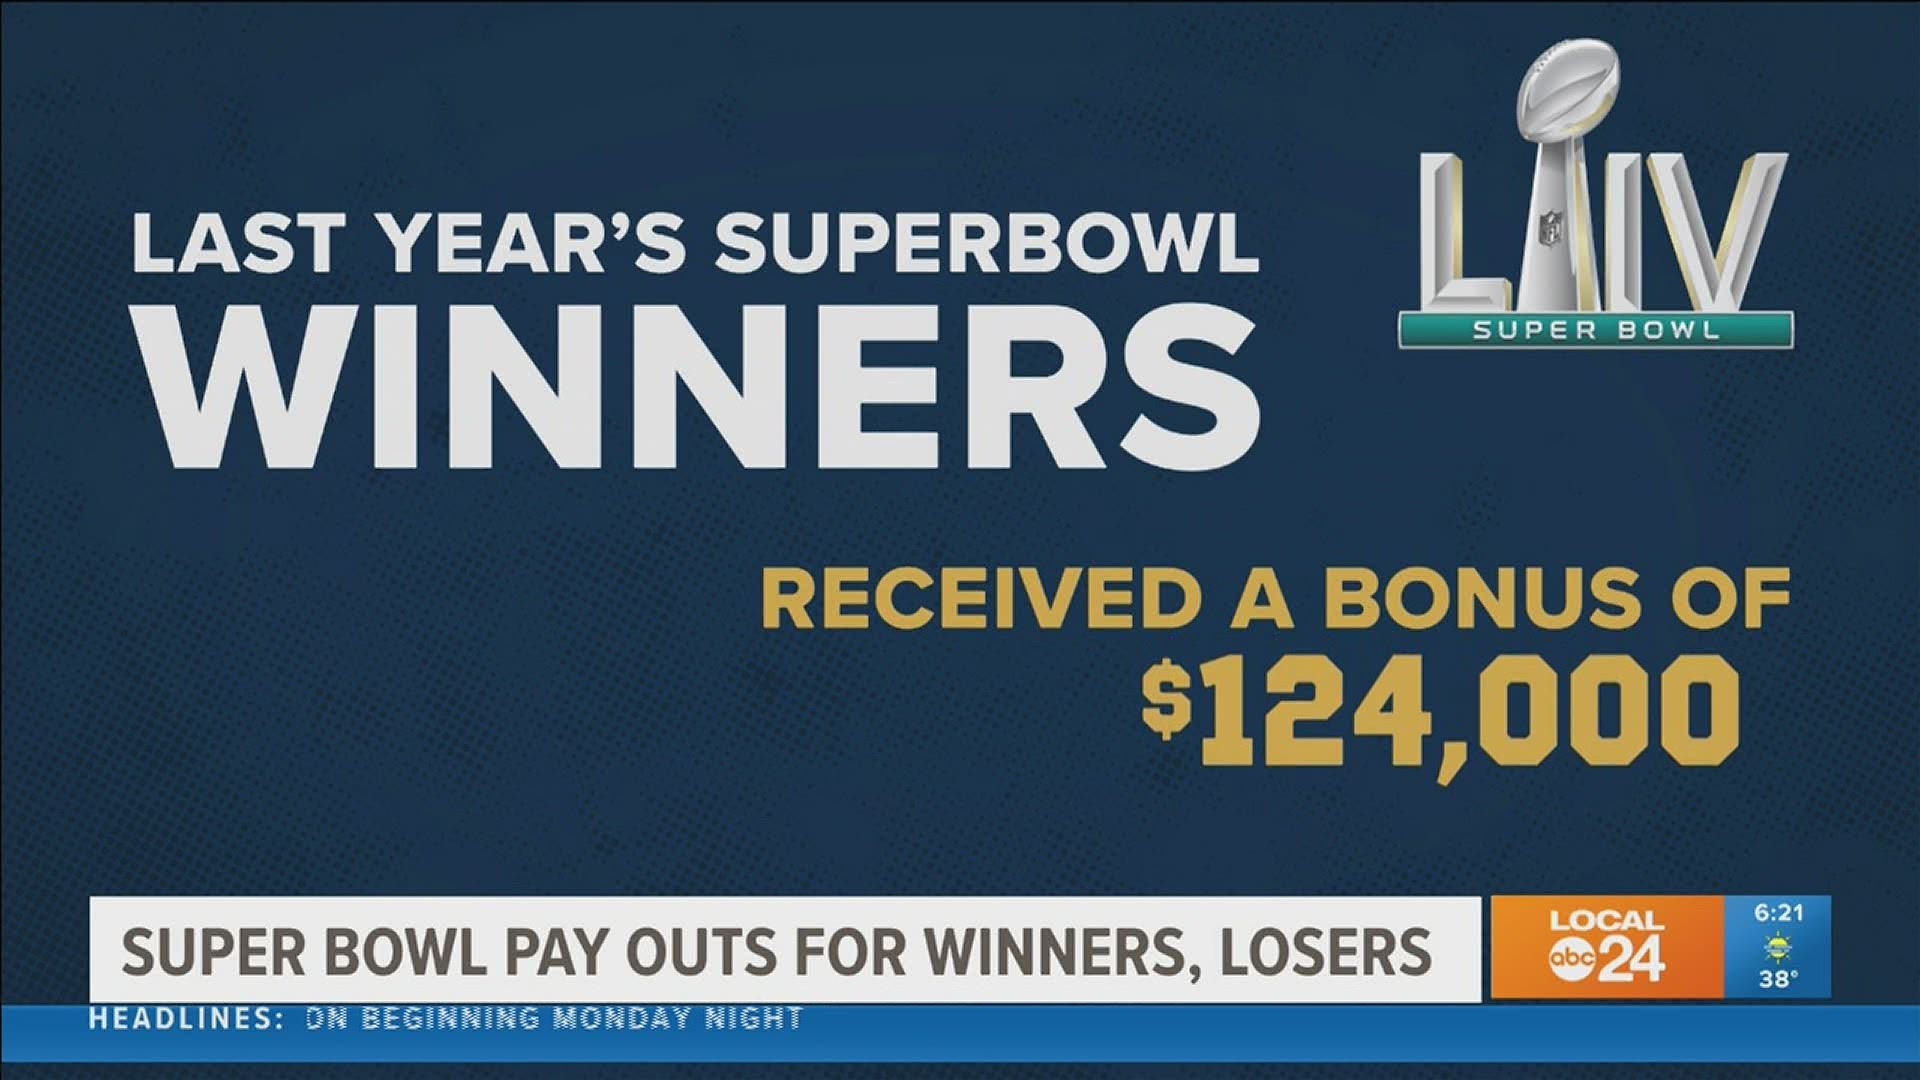 While millions tune in for the biggest sporting event in the U.S., teams get paid thousands for the big game.